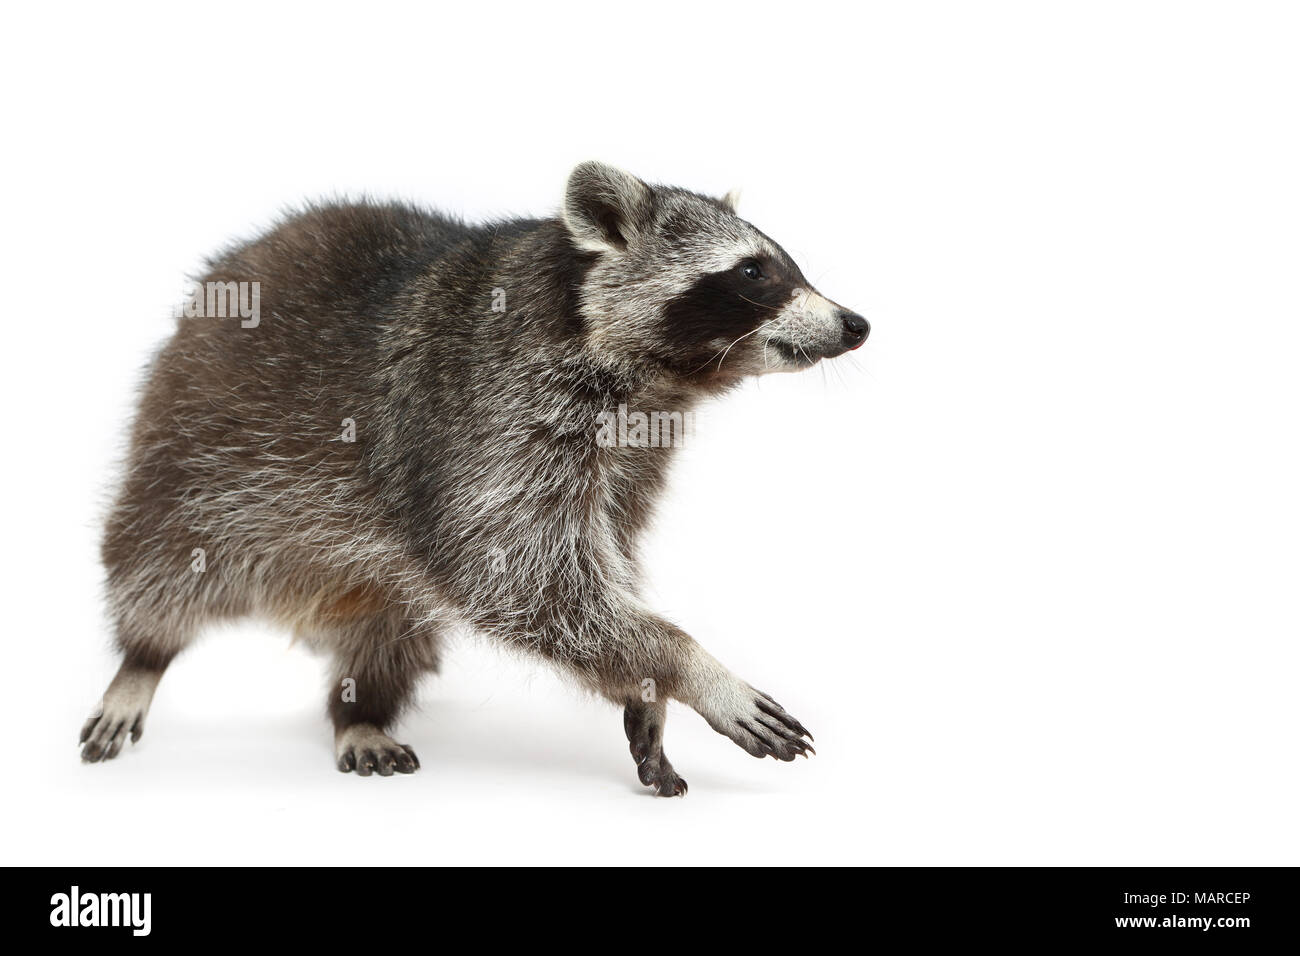 Raccoon (Procyon lotor). Adult walking, seen side-on. Studio picture against a white background. Germany Stock Photo